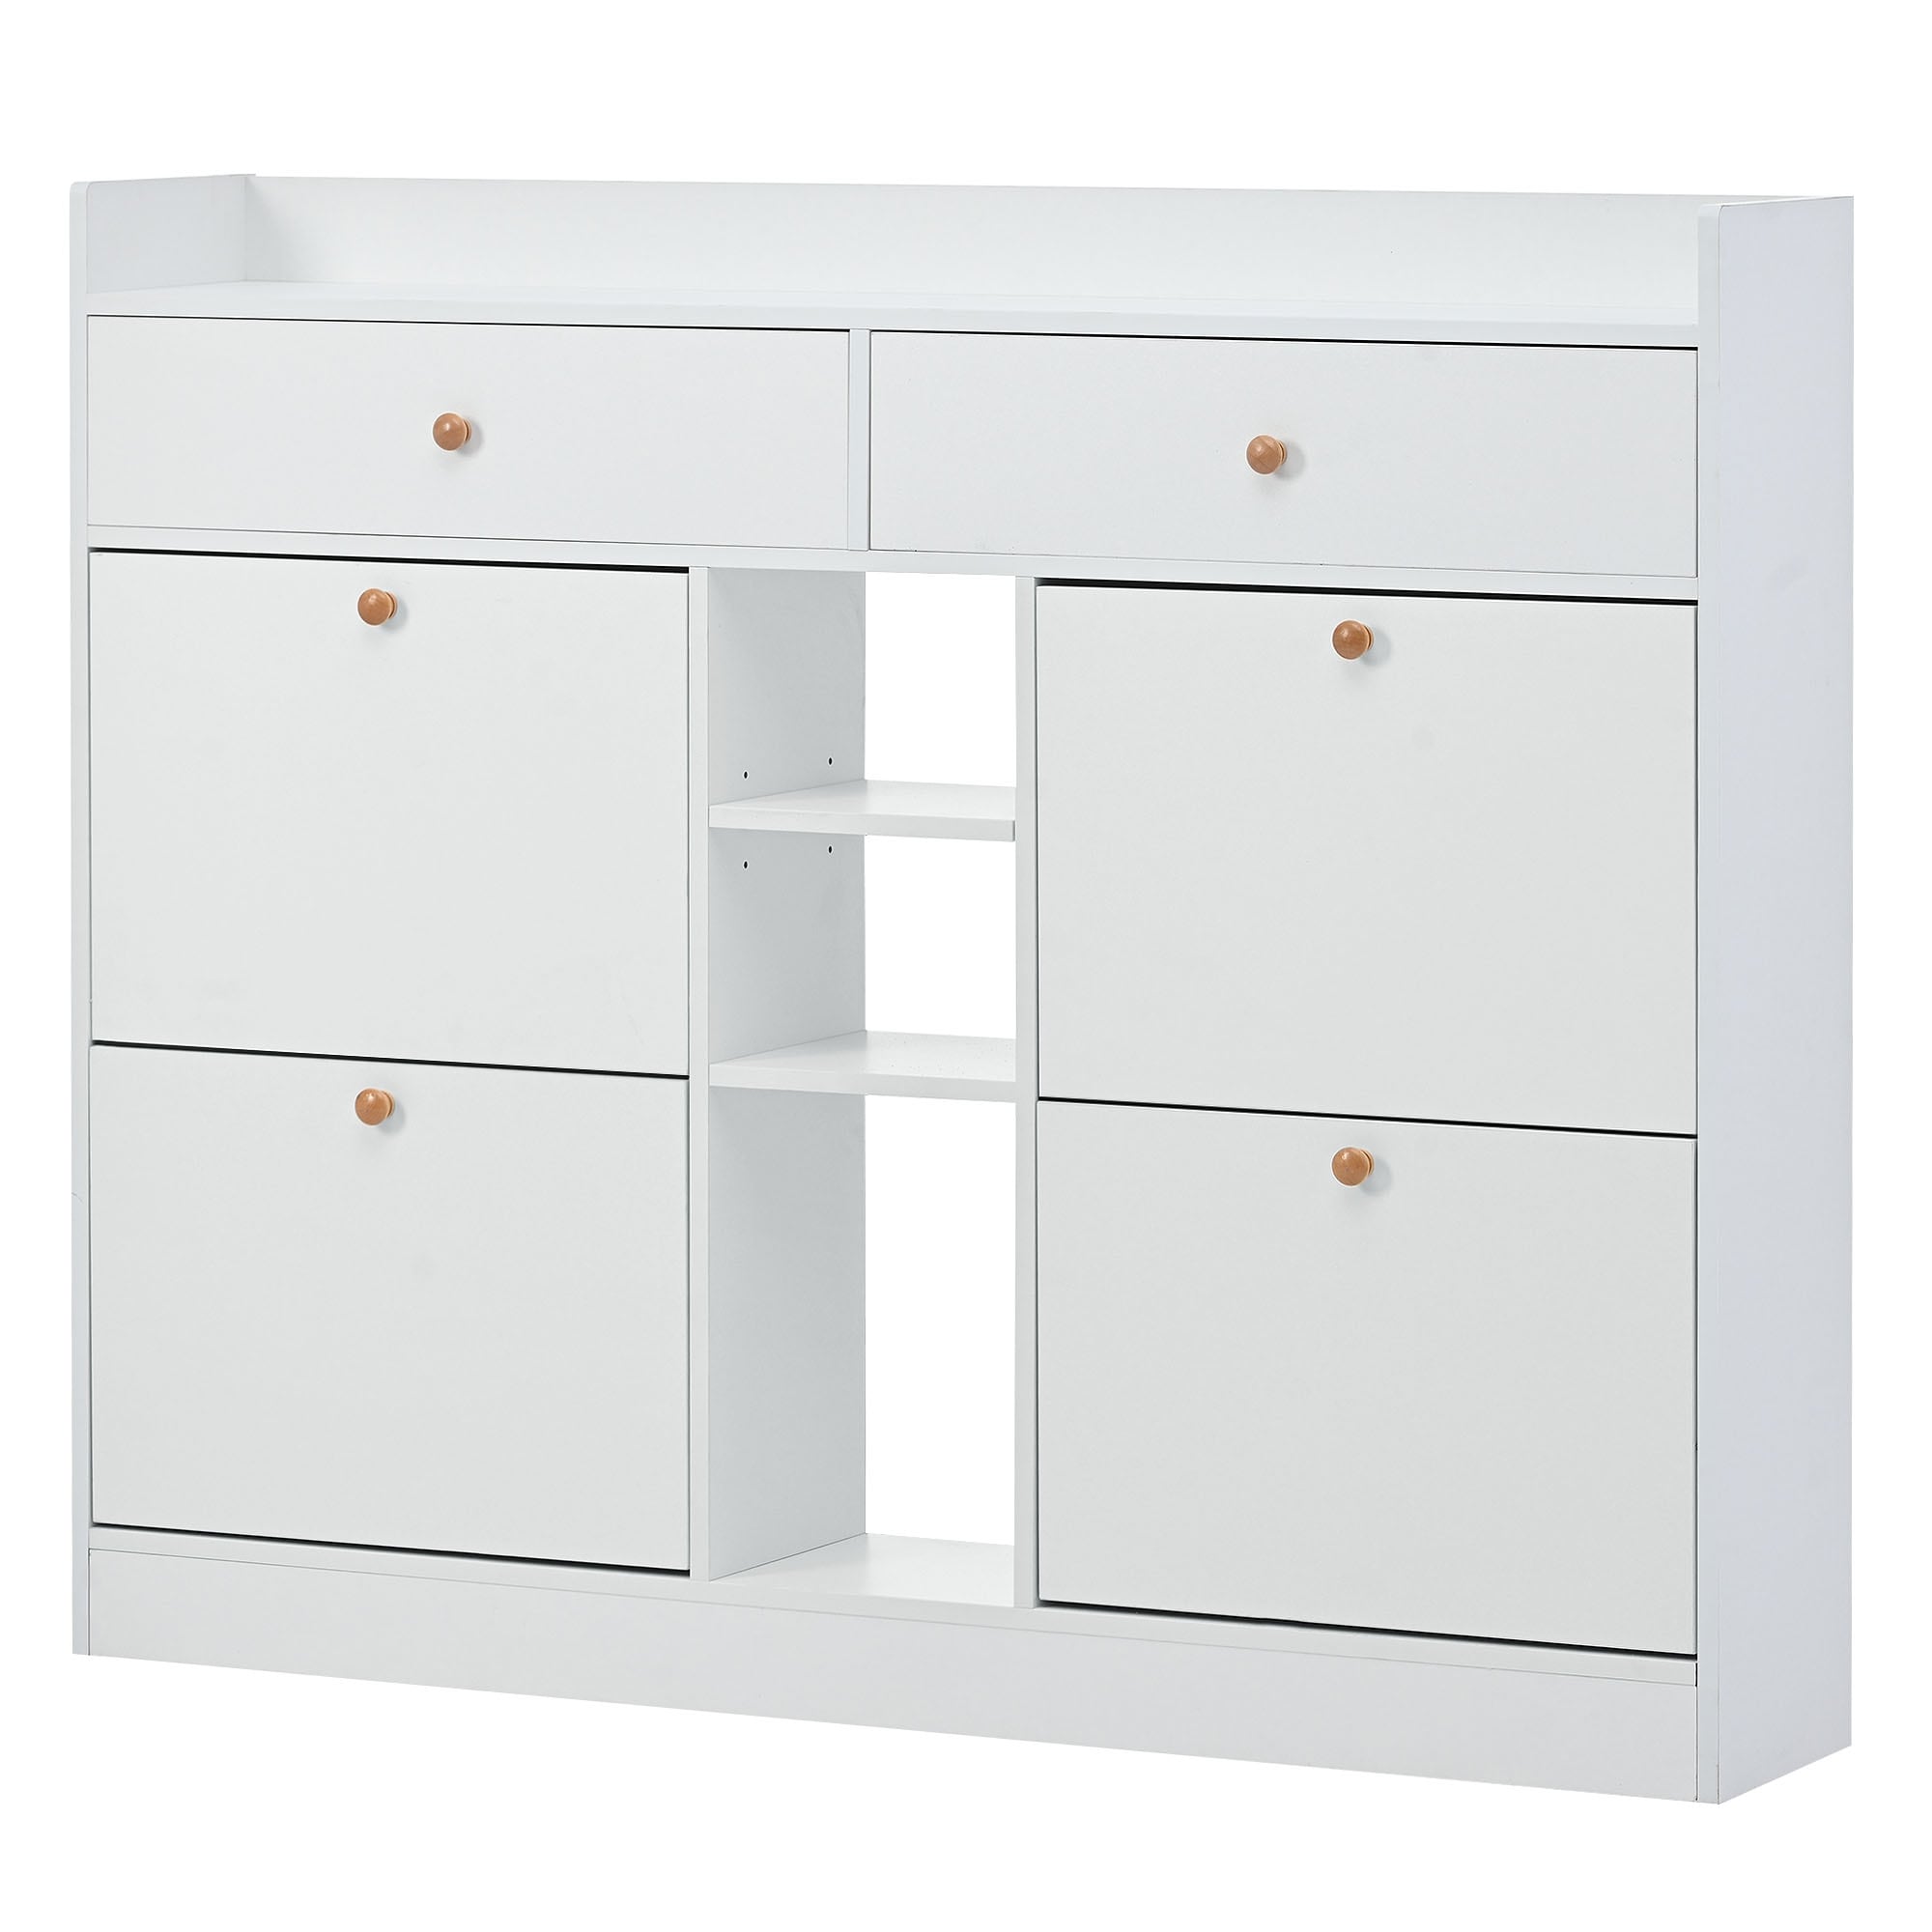 https://ak1.ostkcdn.com/images/products/is/images/direct/77bcdcdddeade07657bbb48ed0b085402fc11ce8/Shoe-Cabinet-with-4-Flip-Drawers-for-Entryway-2-Tier-Shoe-Storage-Organizer-w--Drawers-Freestanding-Shoe-Rack-Storage-Organizer.jpg